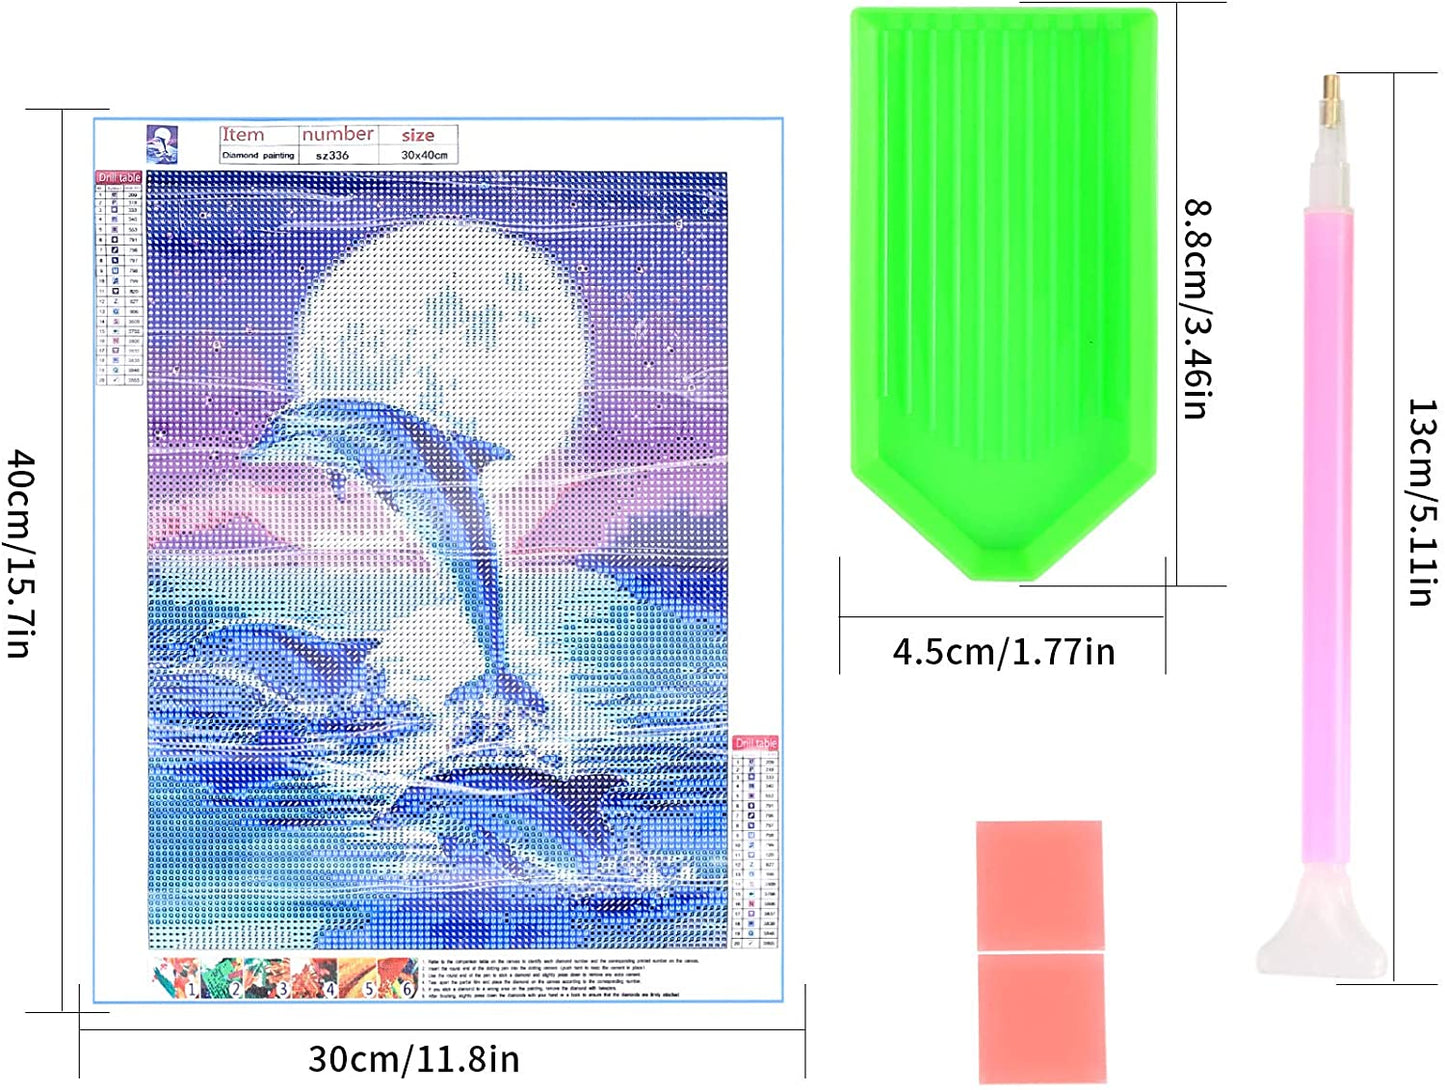 5D Full Drill Rhinestone Diamond Embroidery Dolphin Paint Kits, Embroidery Cross Stitch DIY Arts Craft Supply for Adults, Kids, Home, Wall Decor(30x40cm) Brand: Does not apply